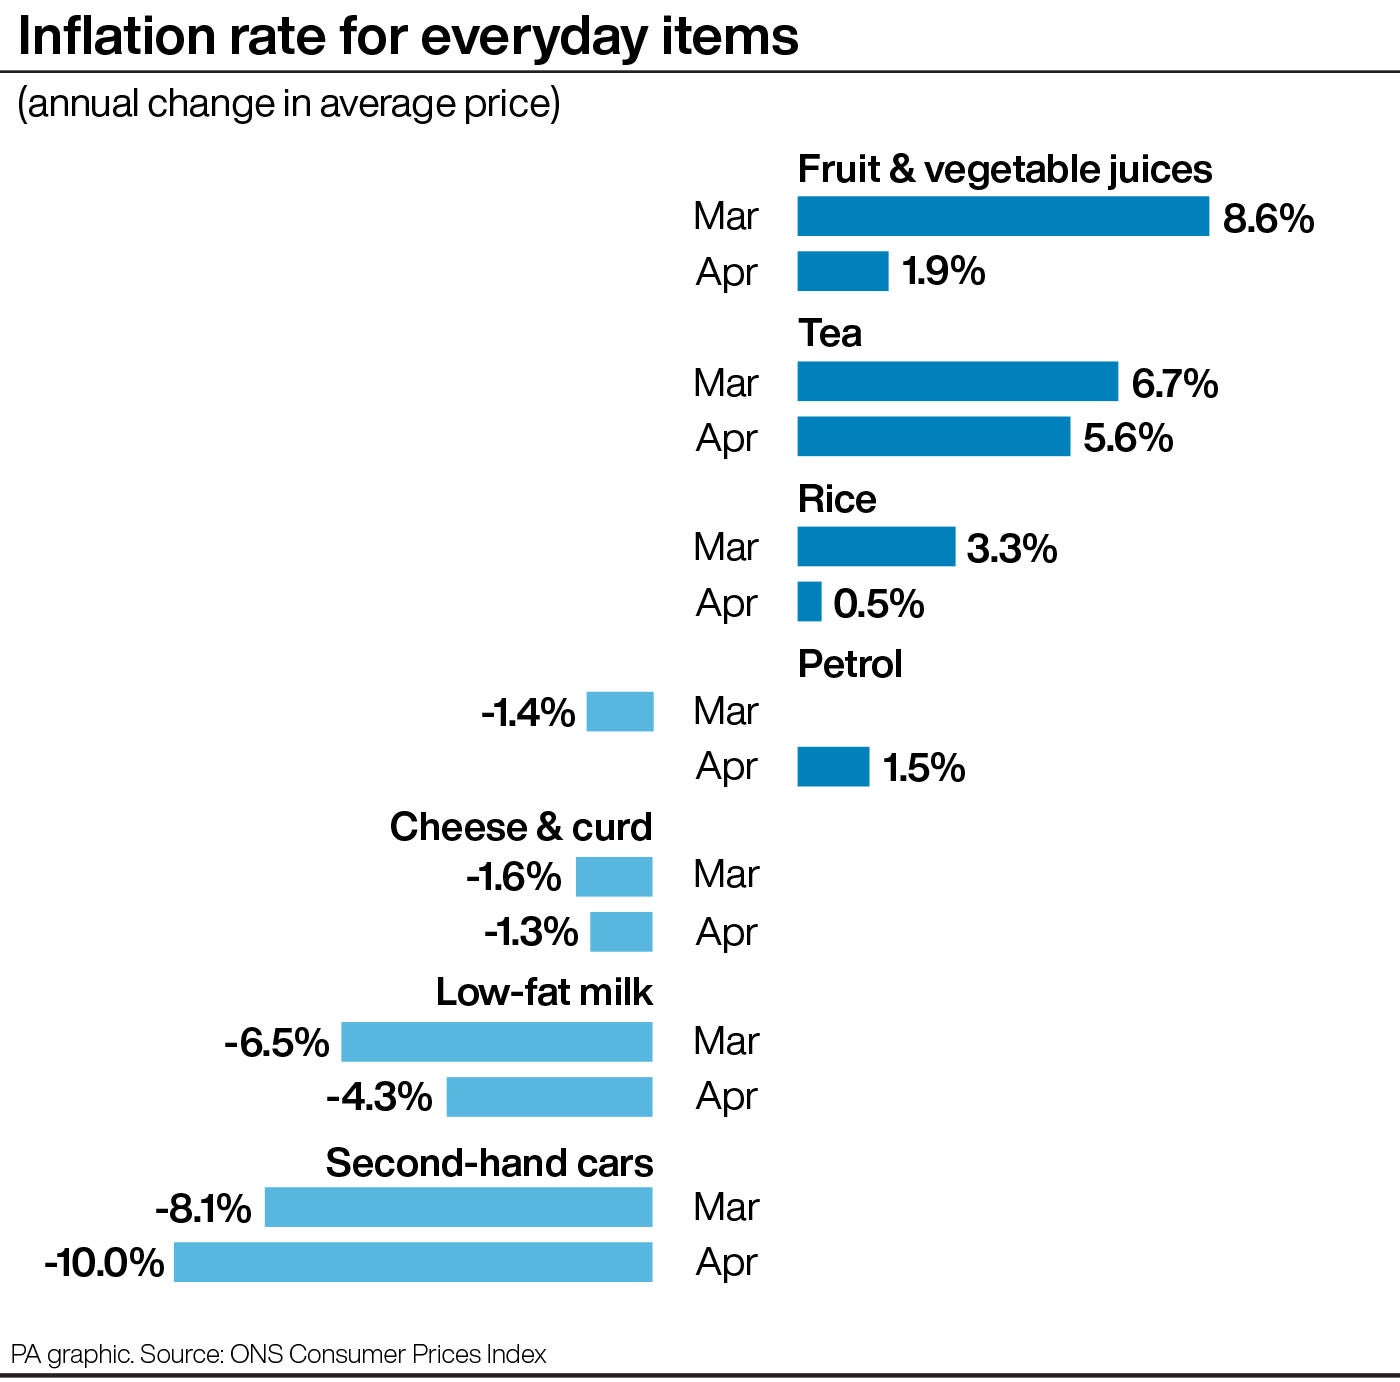 Inflation rate for everyday items